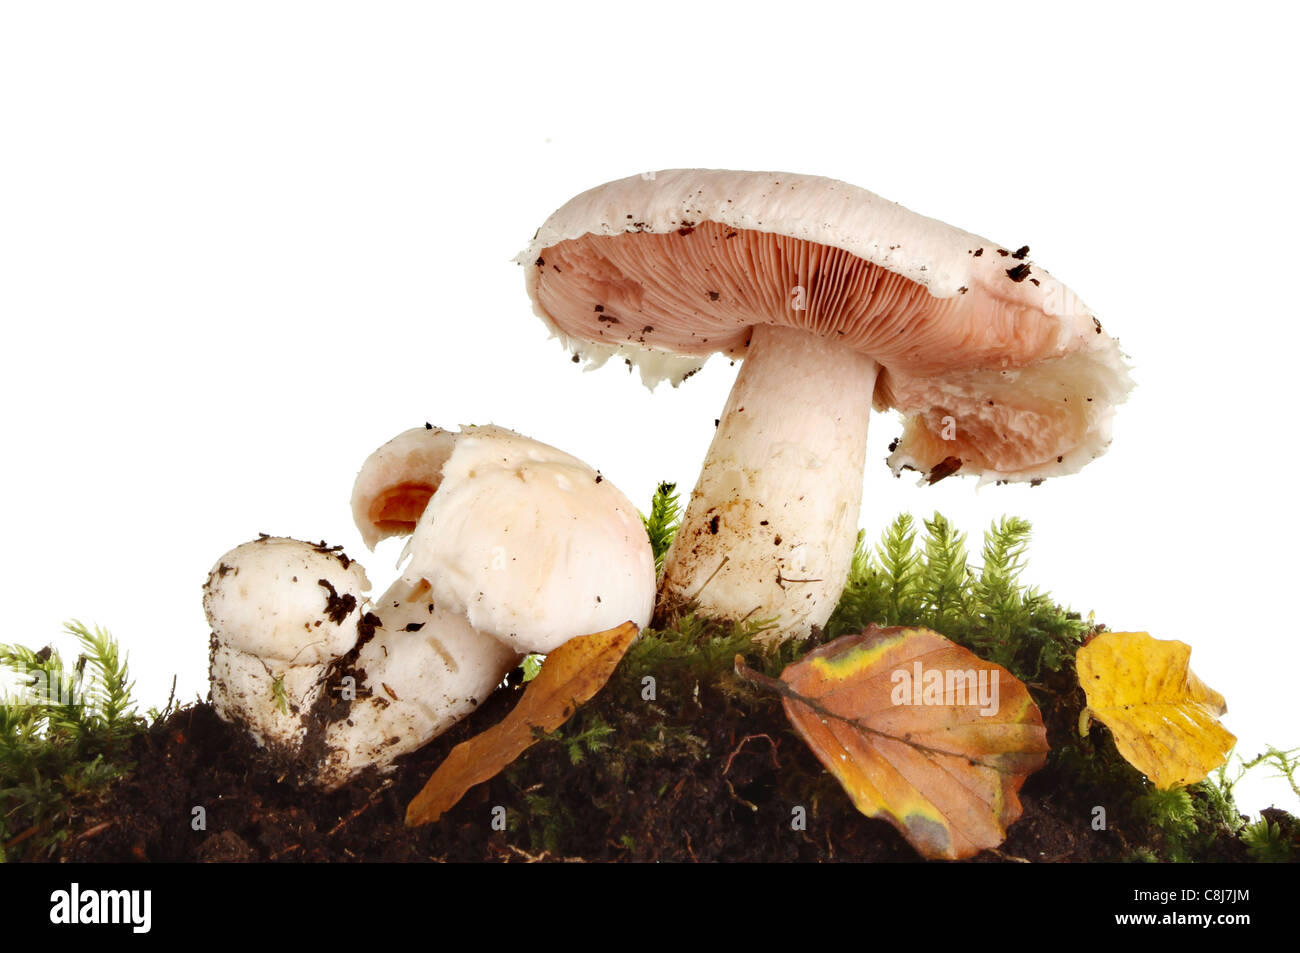 Wild mushrooms in moss soil and Autumn leaves against a white background Stock Photo